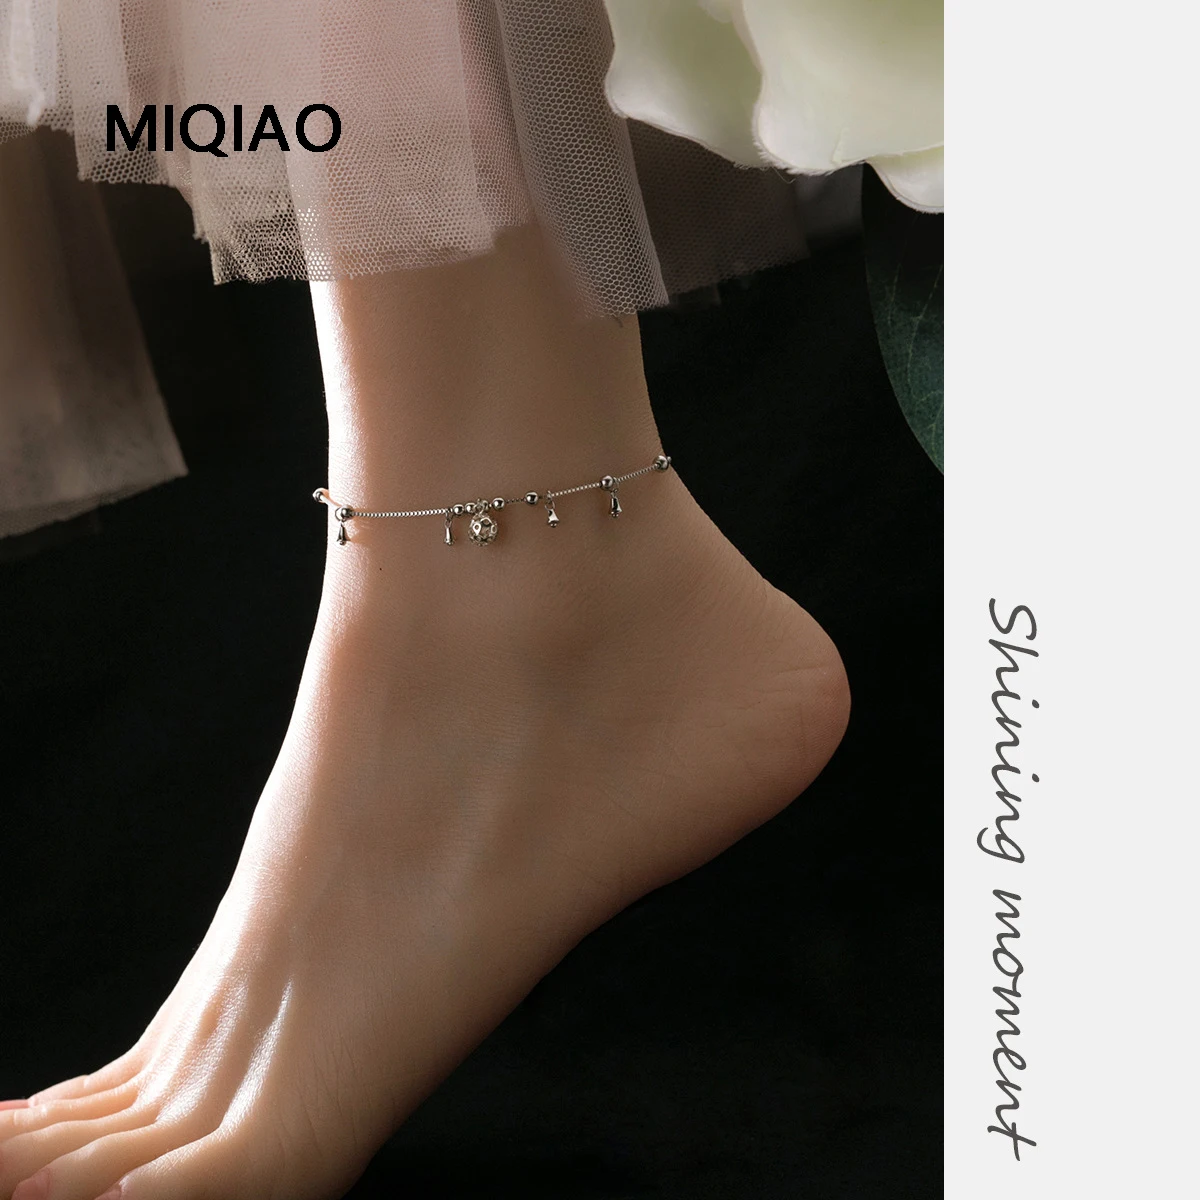 MIQIAO Silver 925 Anklets For Women Small Ball Bell Foot Bracelet On The Leg Jewelry Real Certified Ankle Chains 925 Sterling